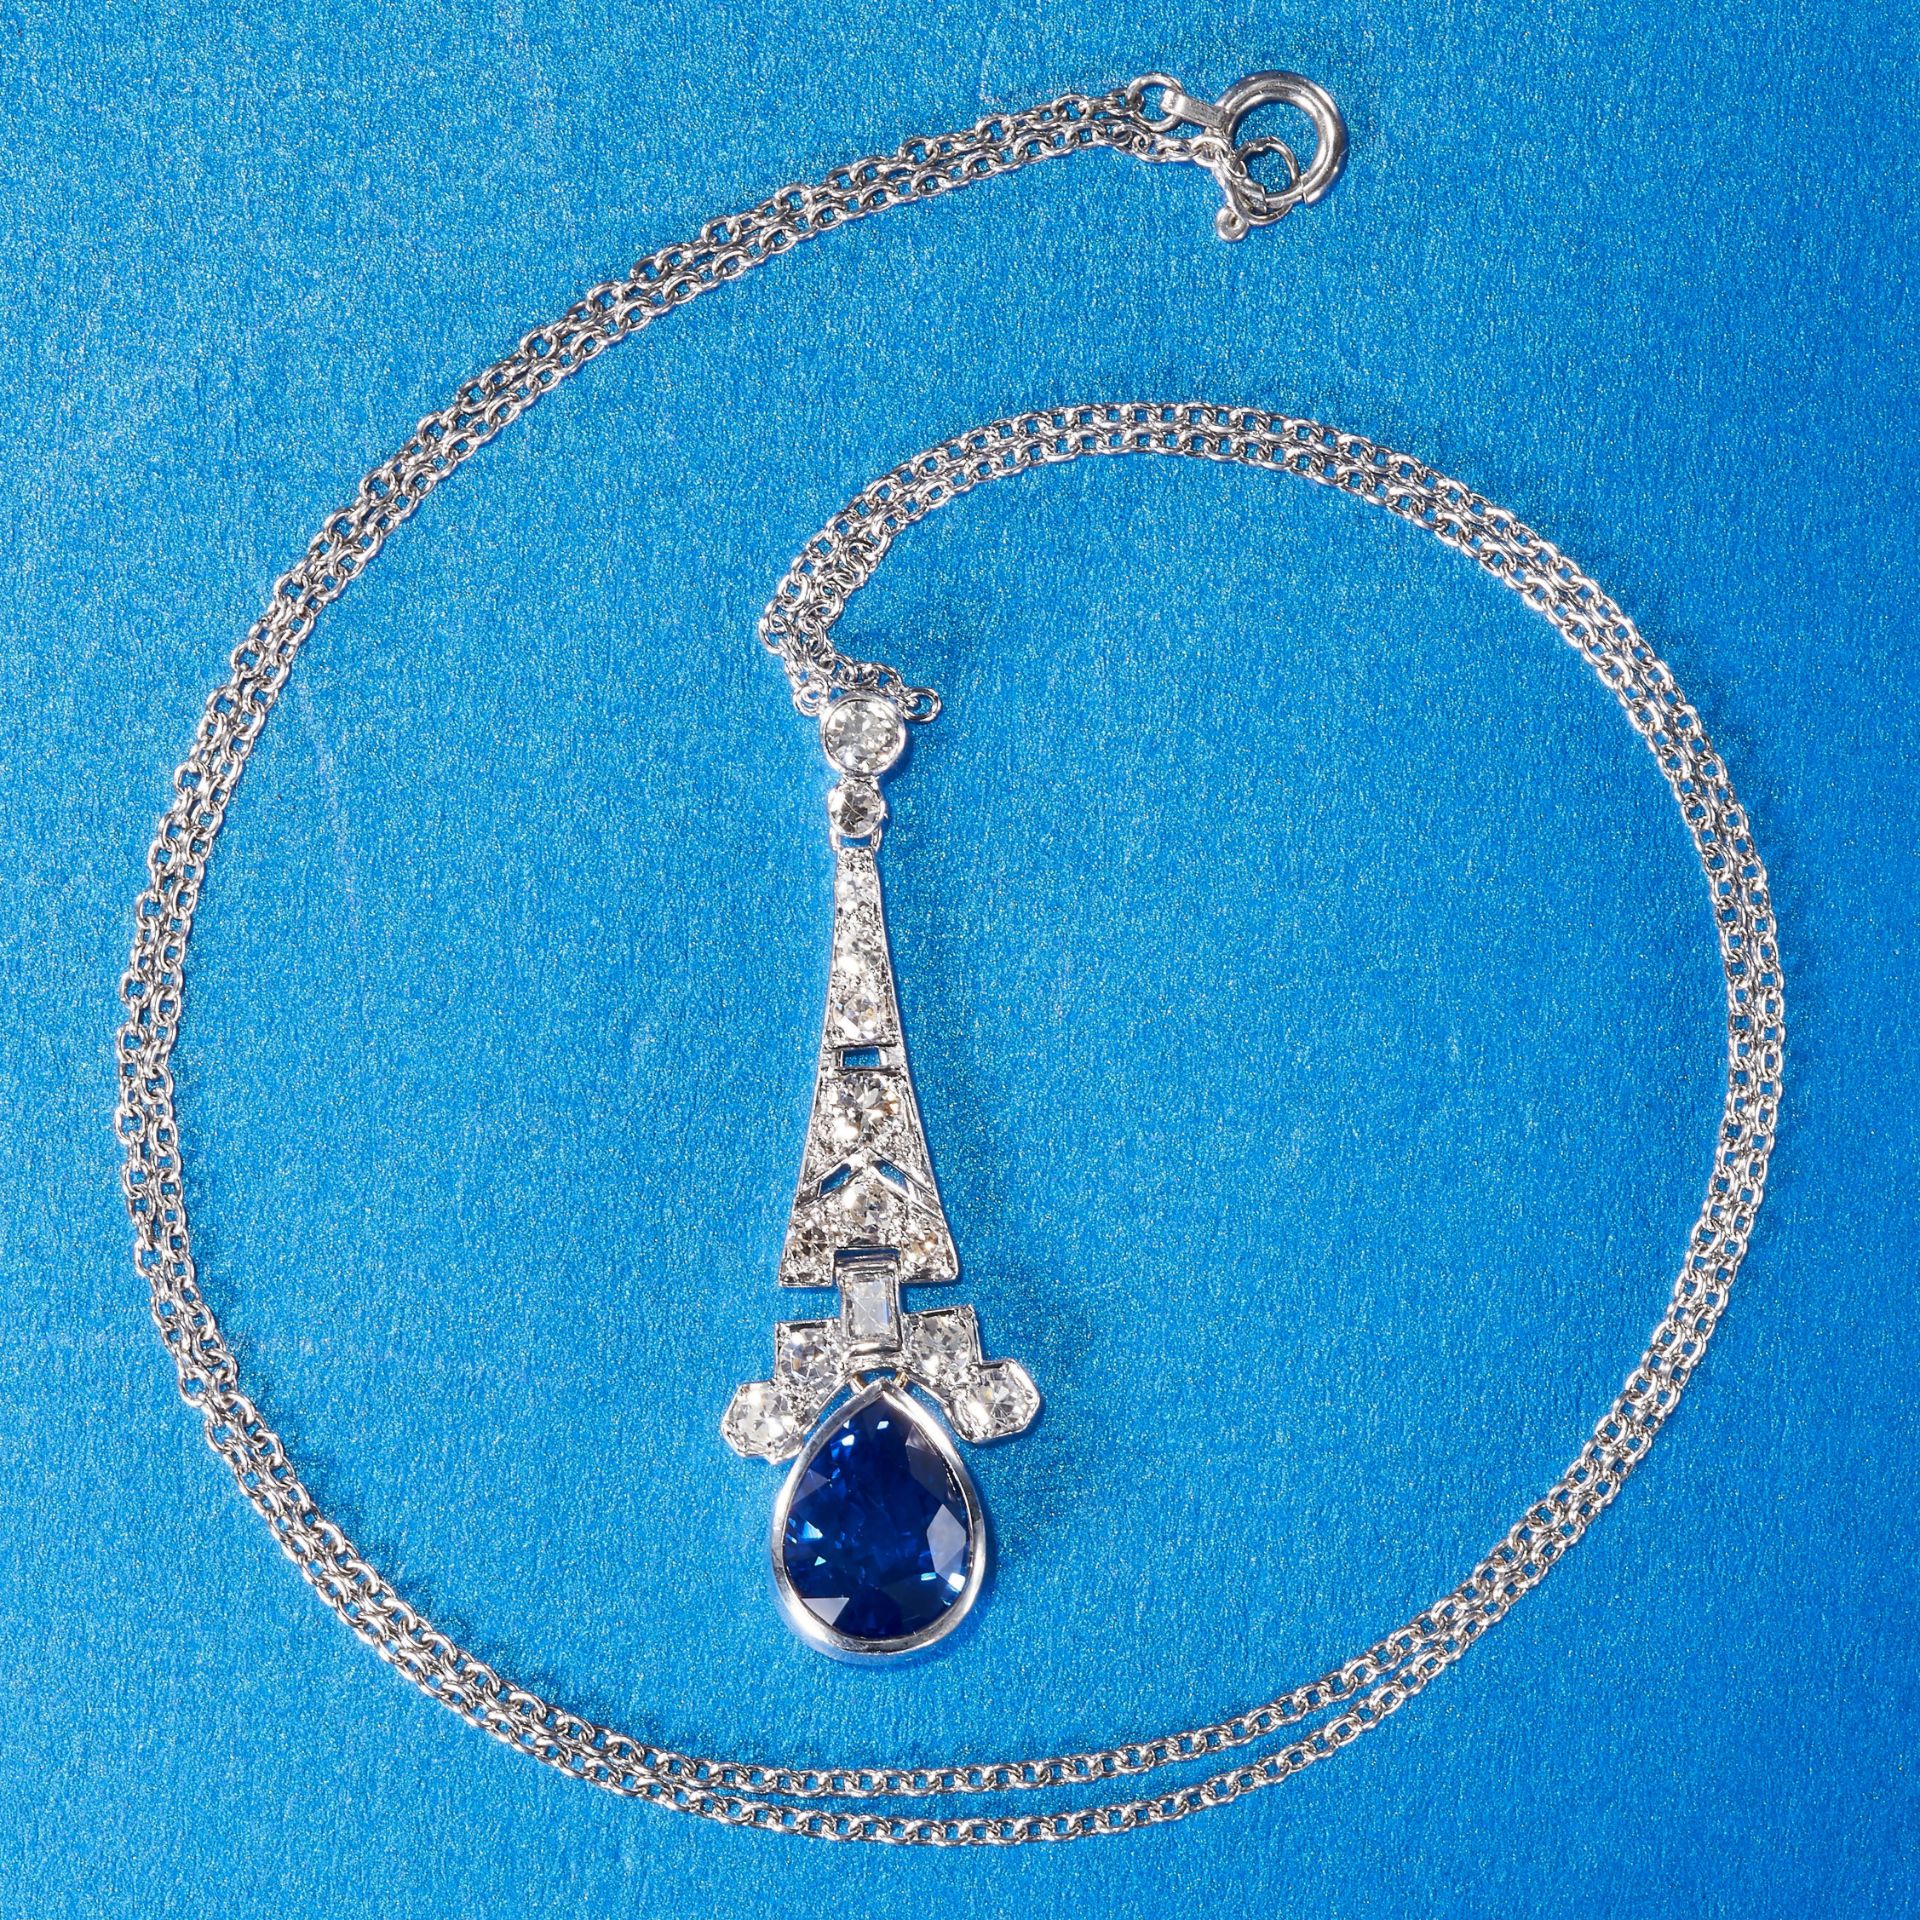 SAPPHIRE AND DIAMOND PENDANT NECKLACE - Image 2 of 2